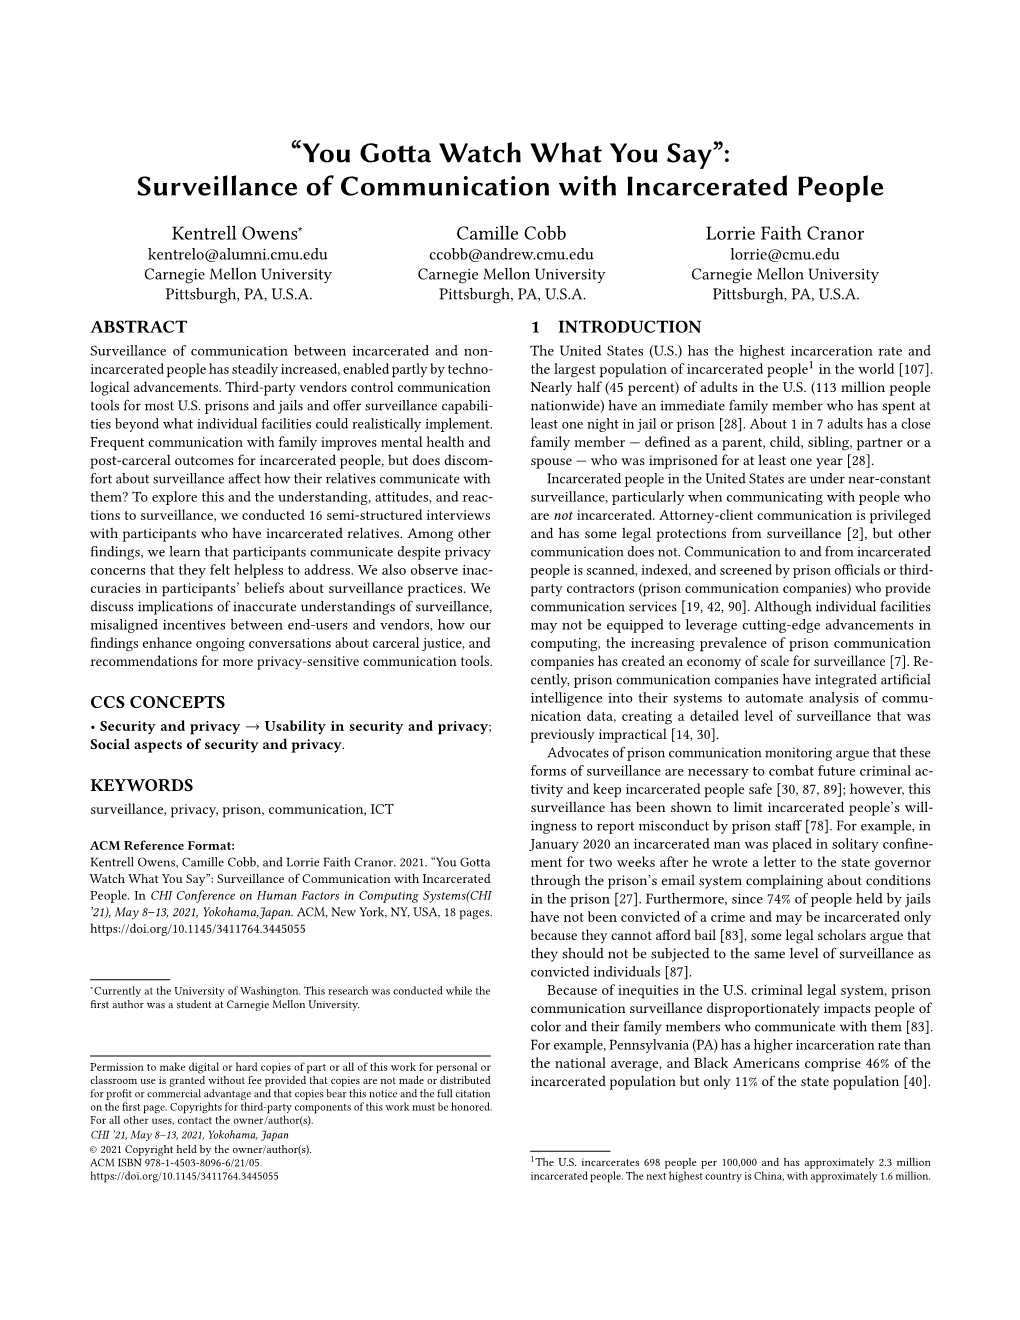 Surveillance of Communication with Incarcerated People